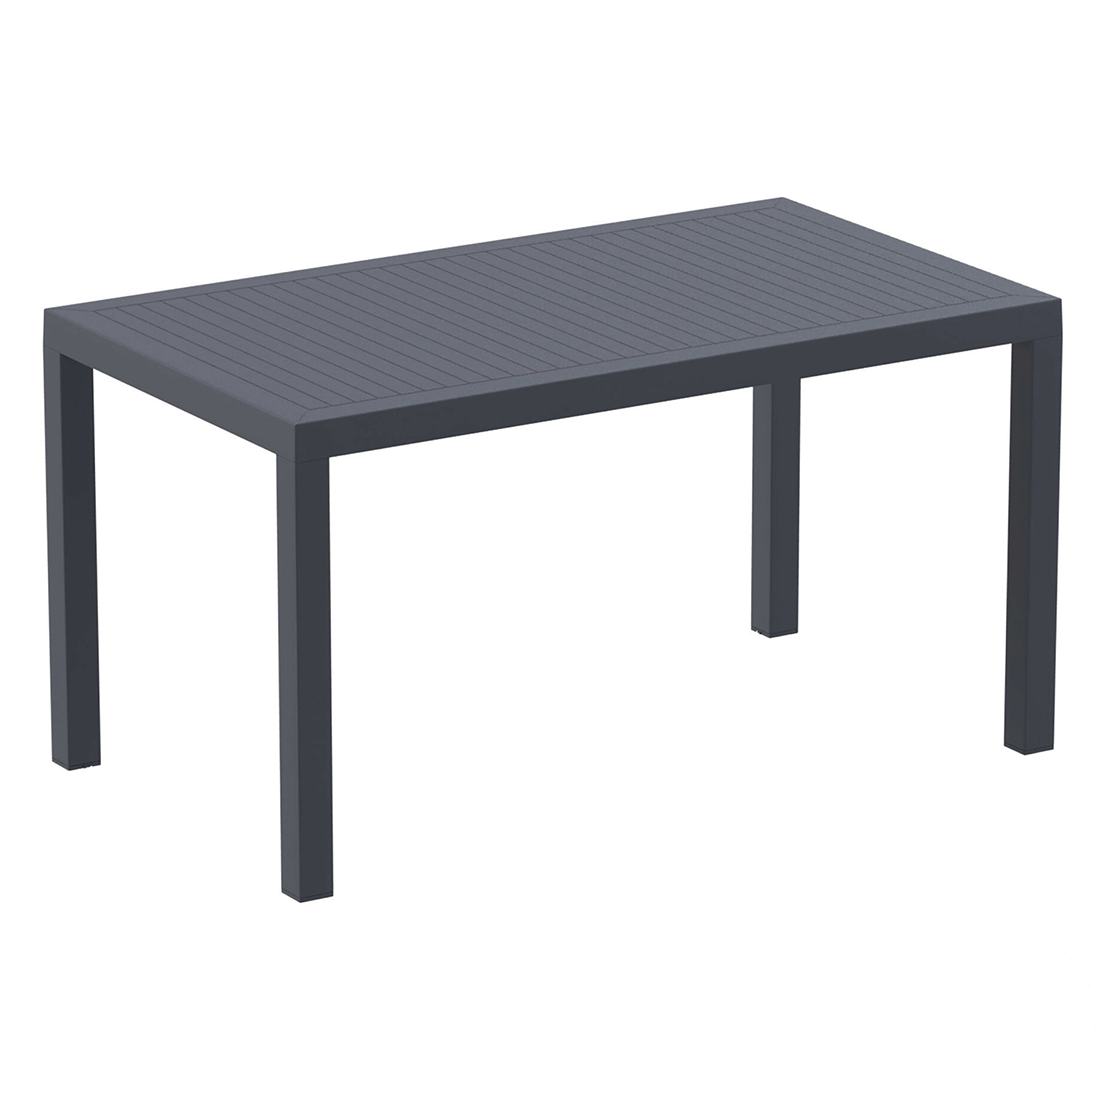 Ares 140 Table 1400×800